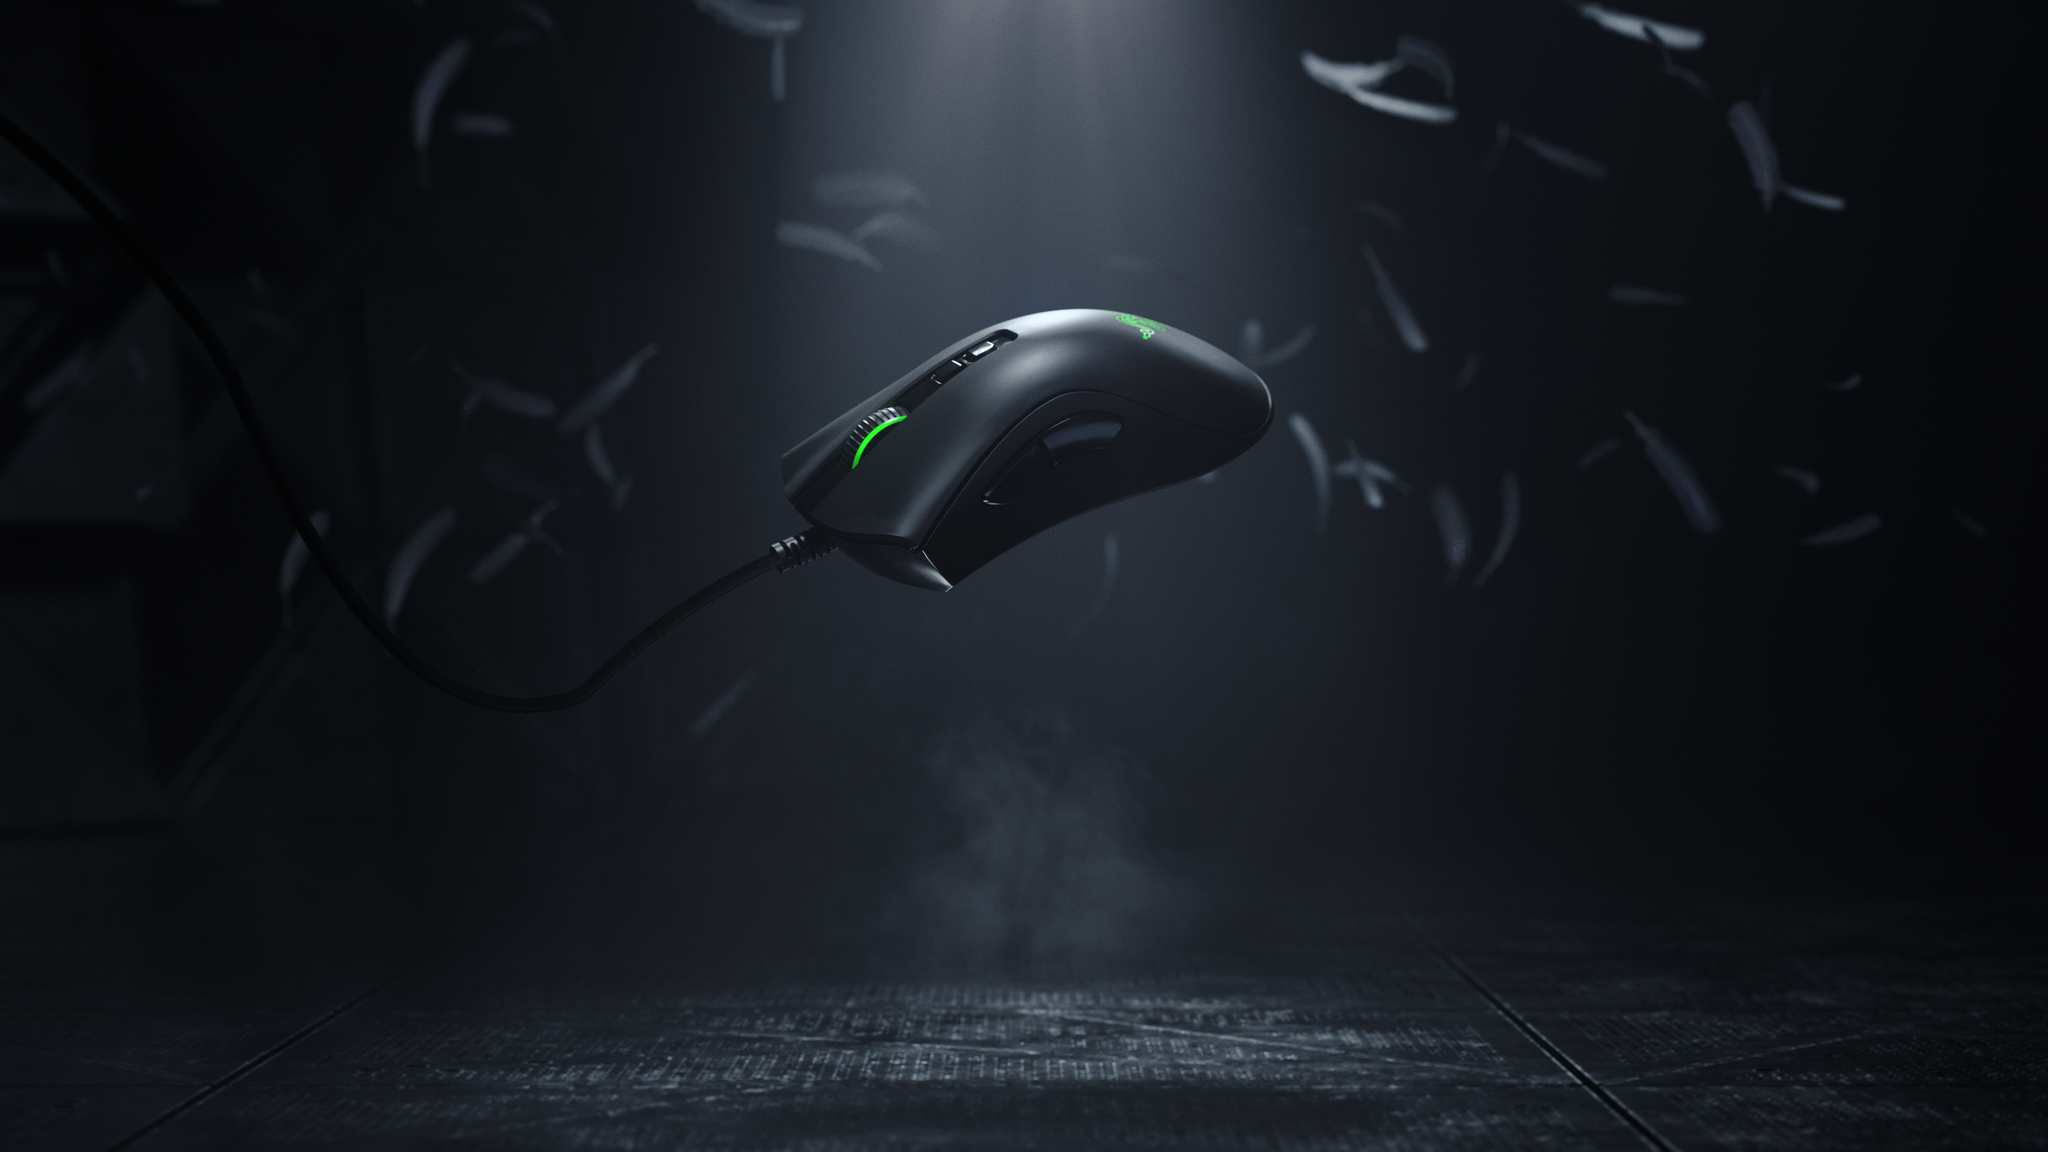 Best Mouse | The Best Gaming Mice - Esports